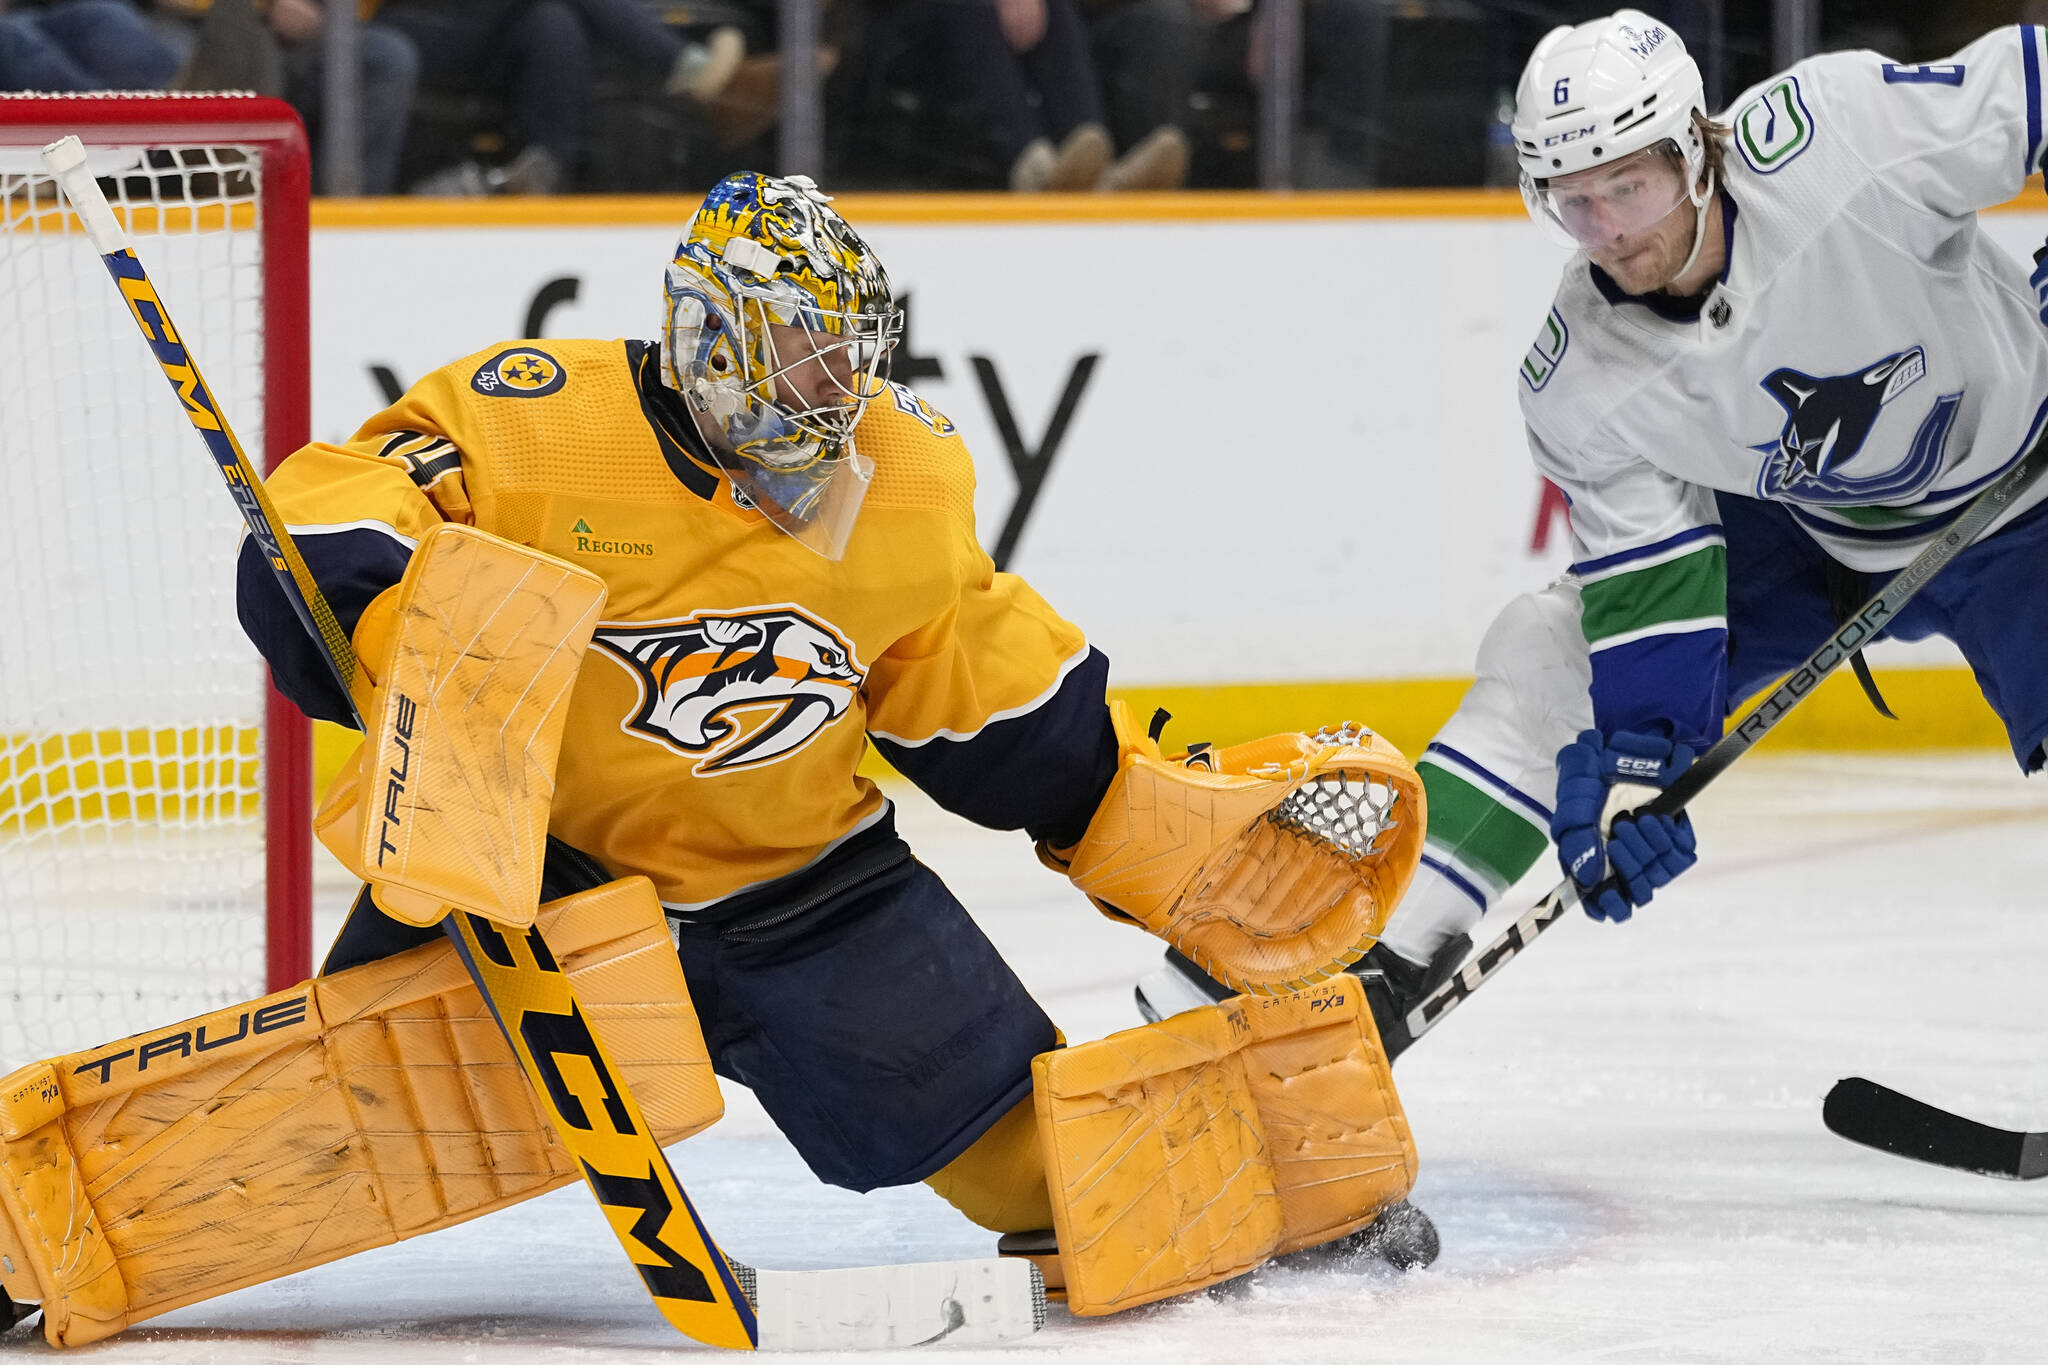 Nashville Predators goaltender Juuse Saros (74) defends the goal against the Vancouver Canucks right wing Brock Boeser (6) during the third period of an NHL hockey game Tuesday, Dec. 19, 2023, in Nashville, Tenn. The Canucks won 5-2. (AP Photo/George Walker IV)